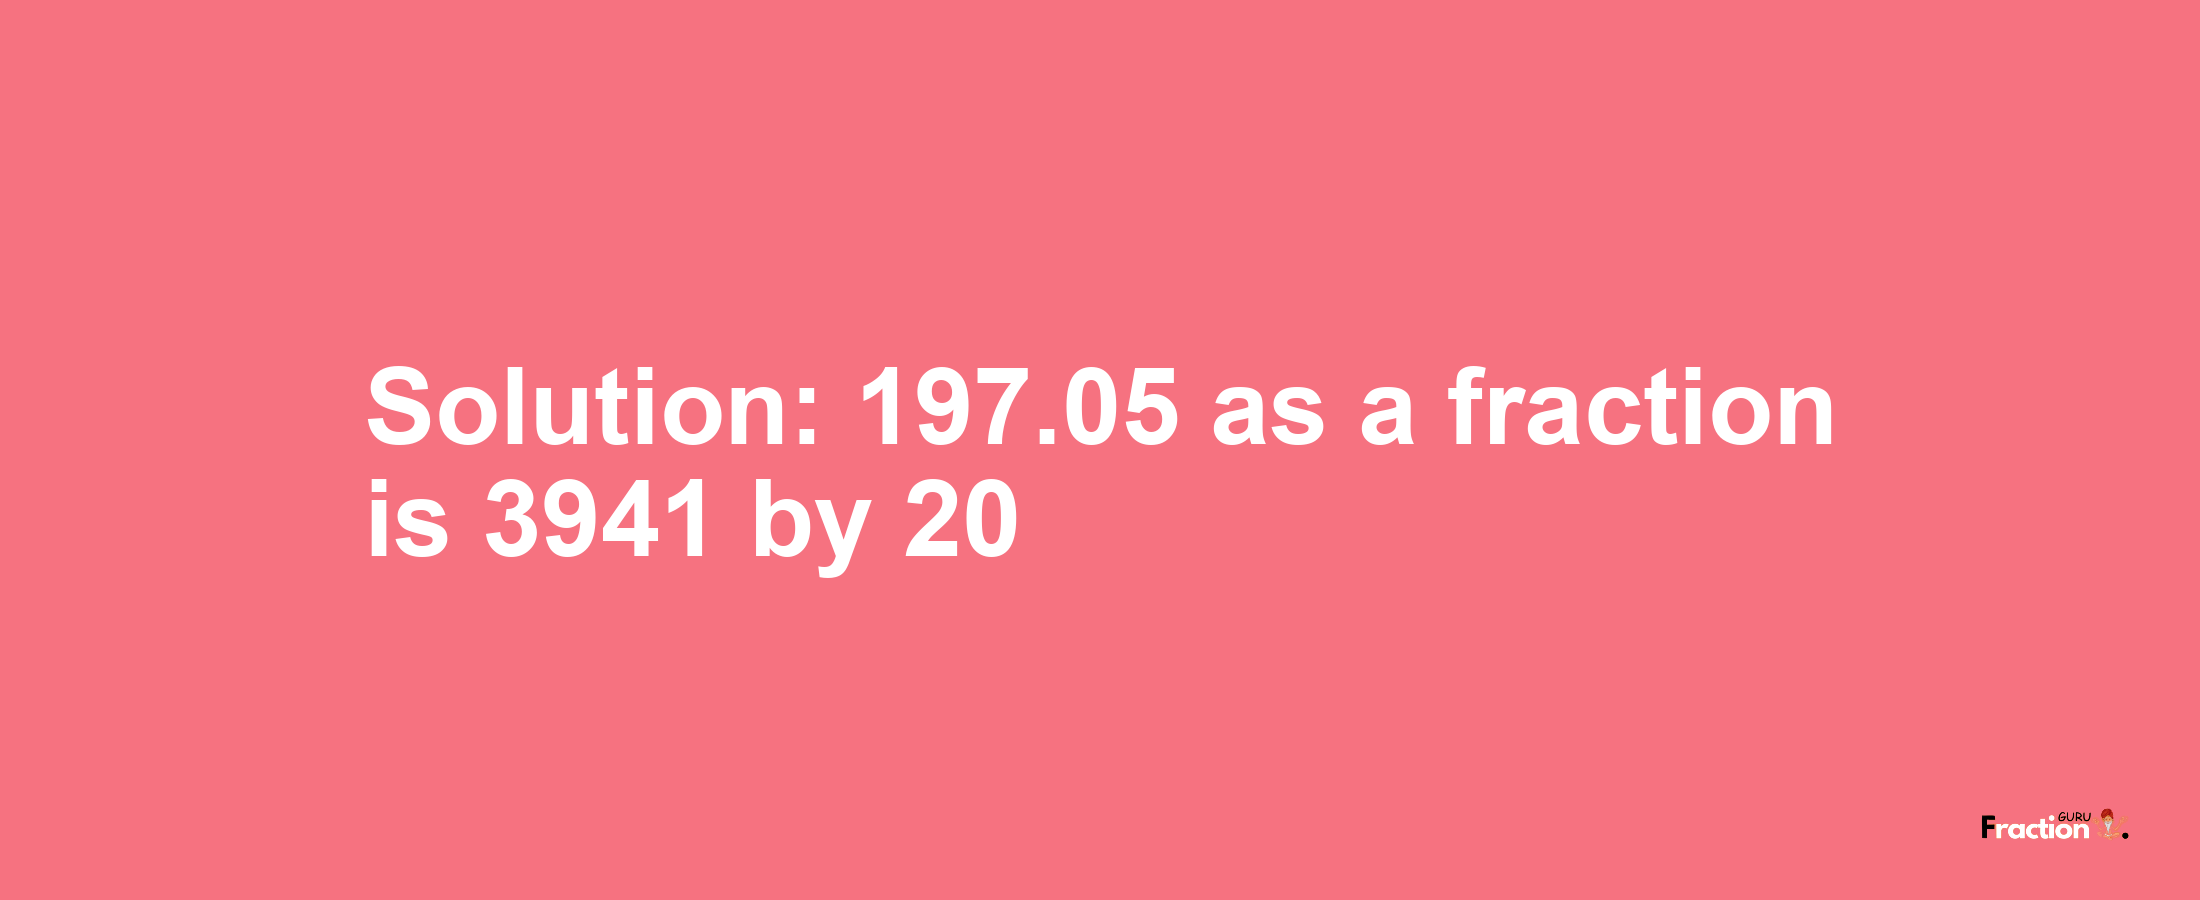 Solution:197.05 as a fraction is 3941/20